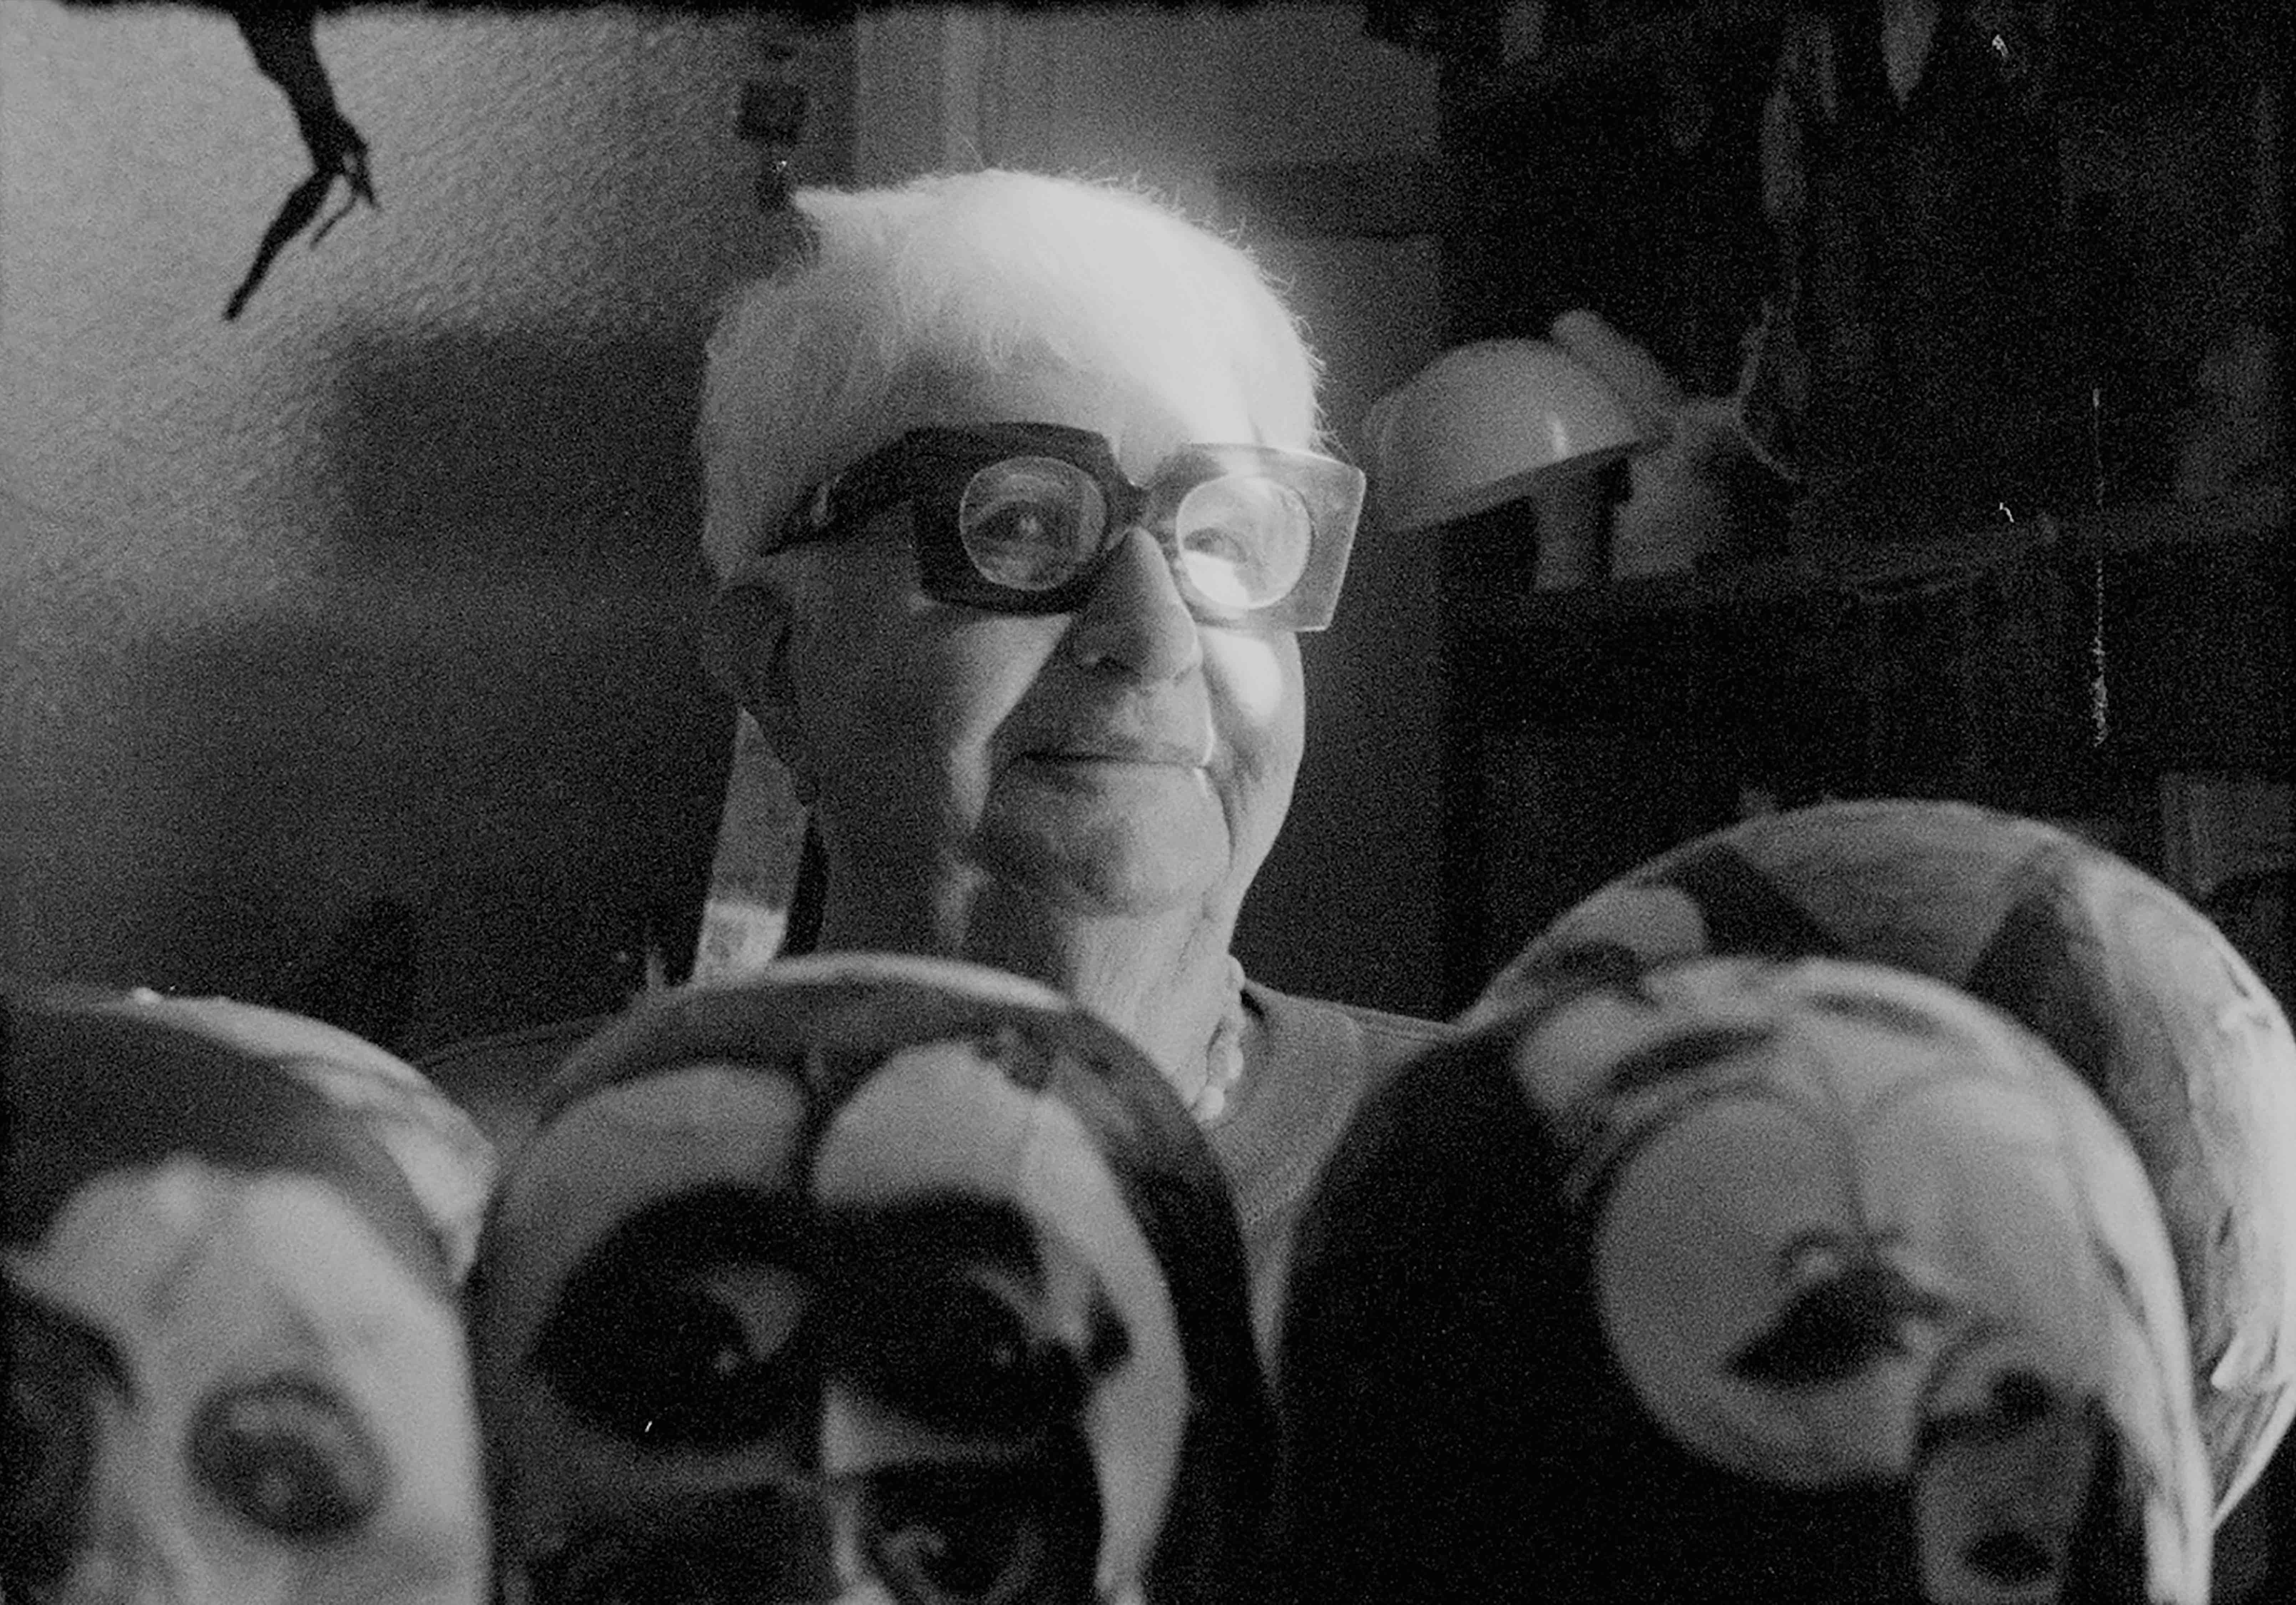 Black and white image of a woman with cropped grey hair and large stylish glasses smiling and sitting amongst life-size sculptural heads in the foreground